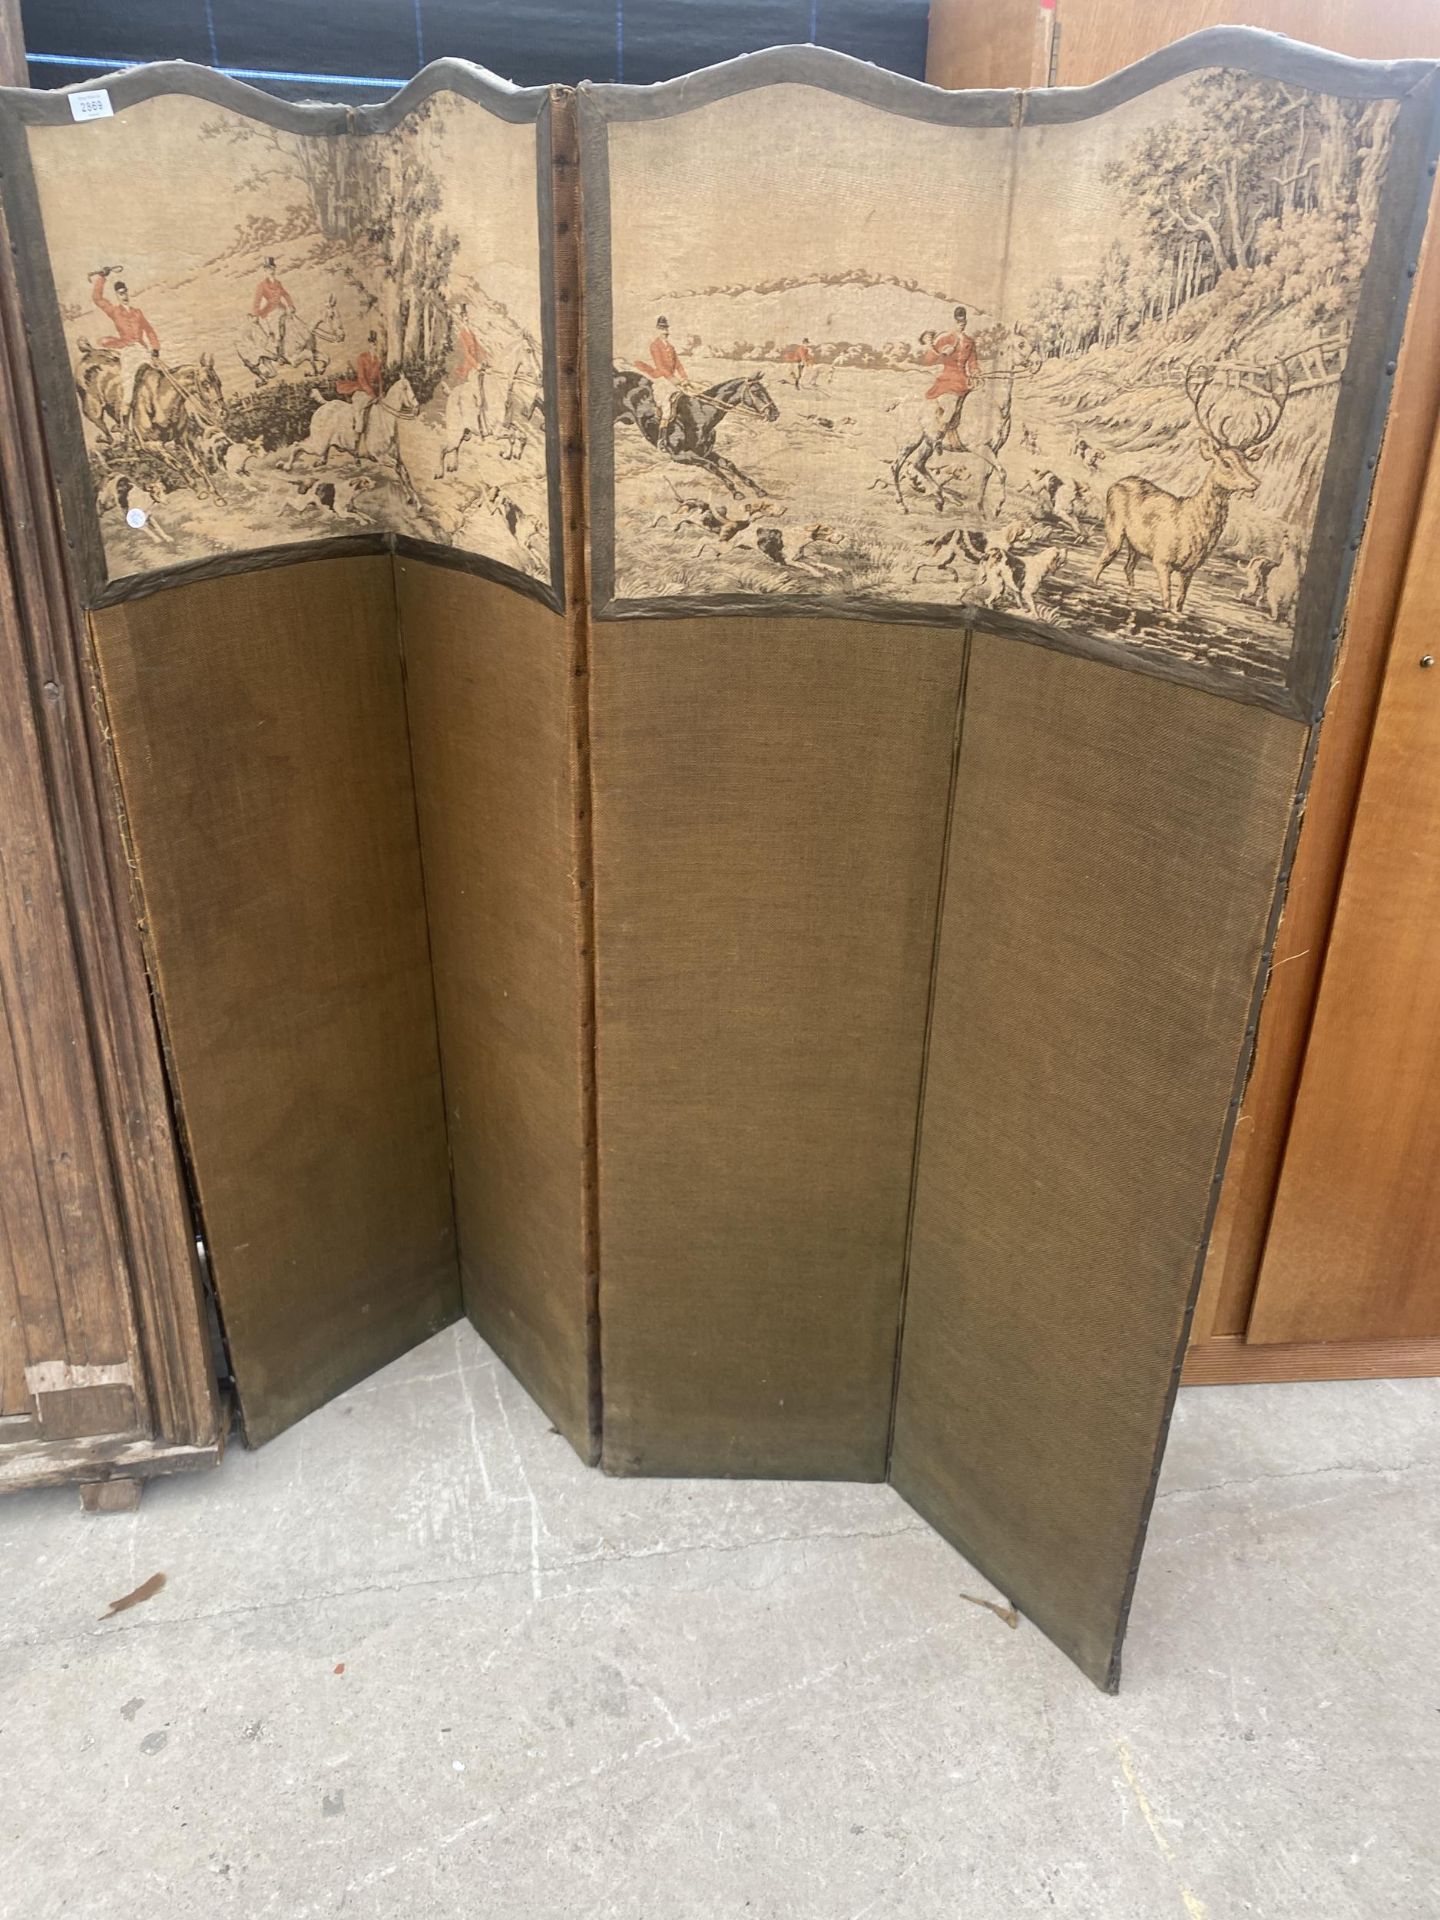 A FOUR DIVISION SCREEN DECORATED WITH HUNTING SCENES - Bild 4 aus 4